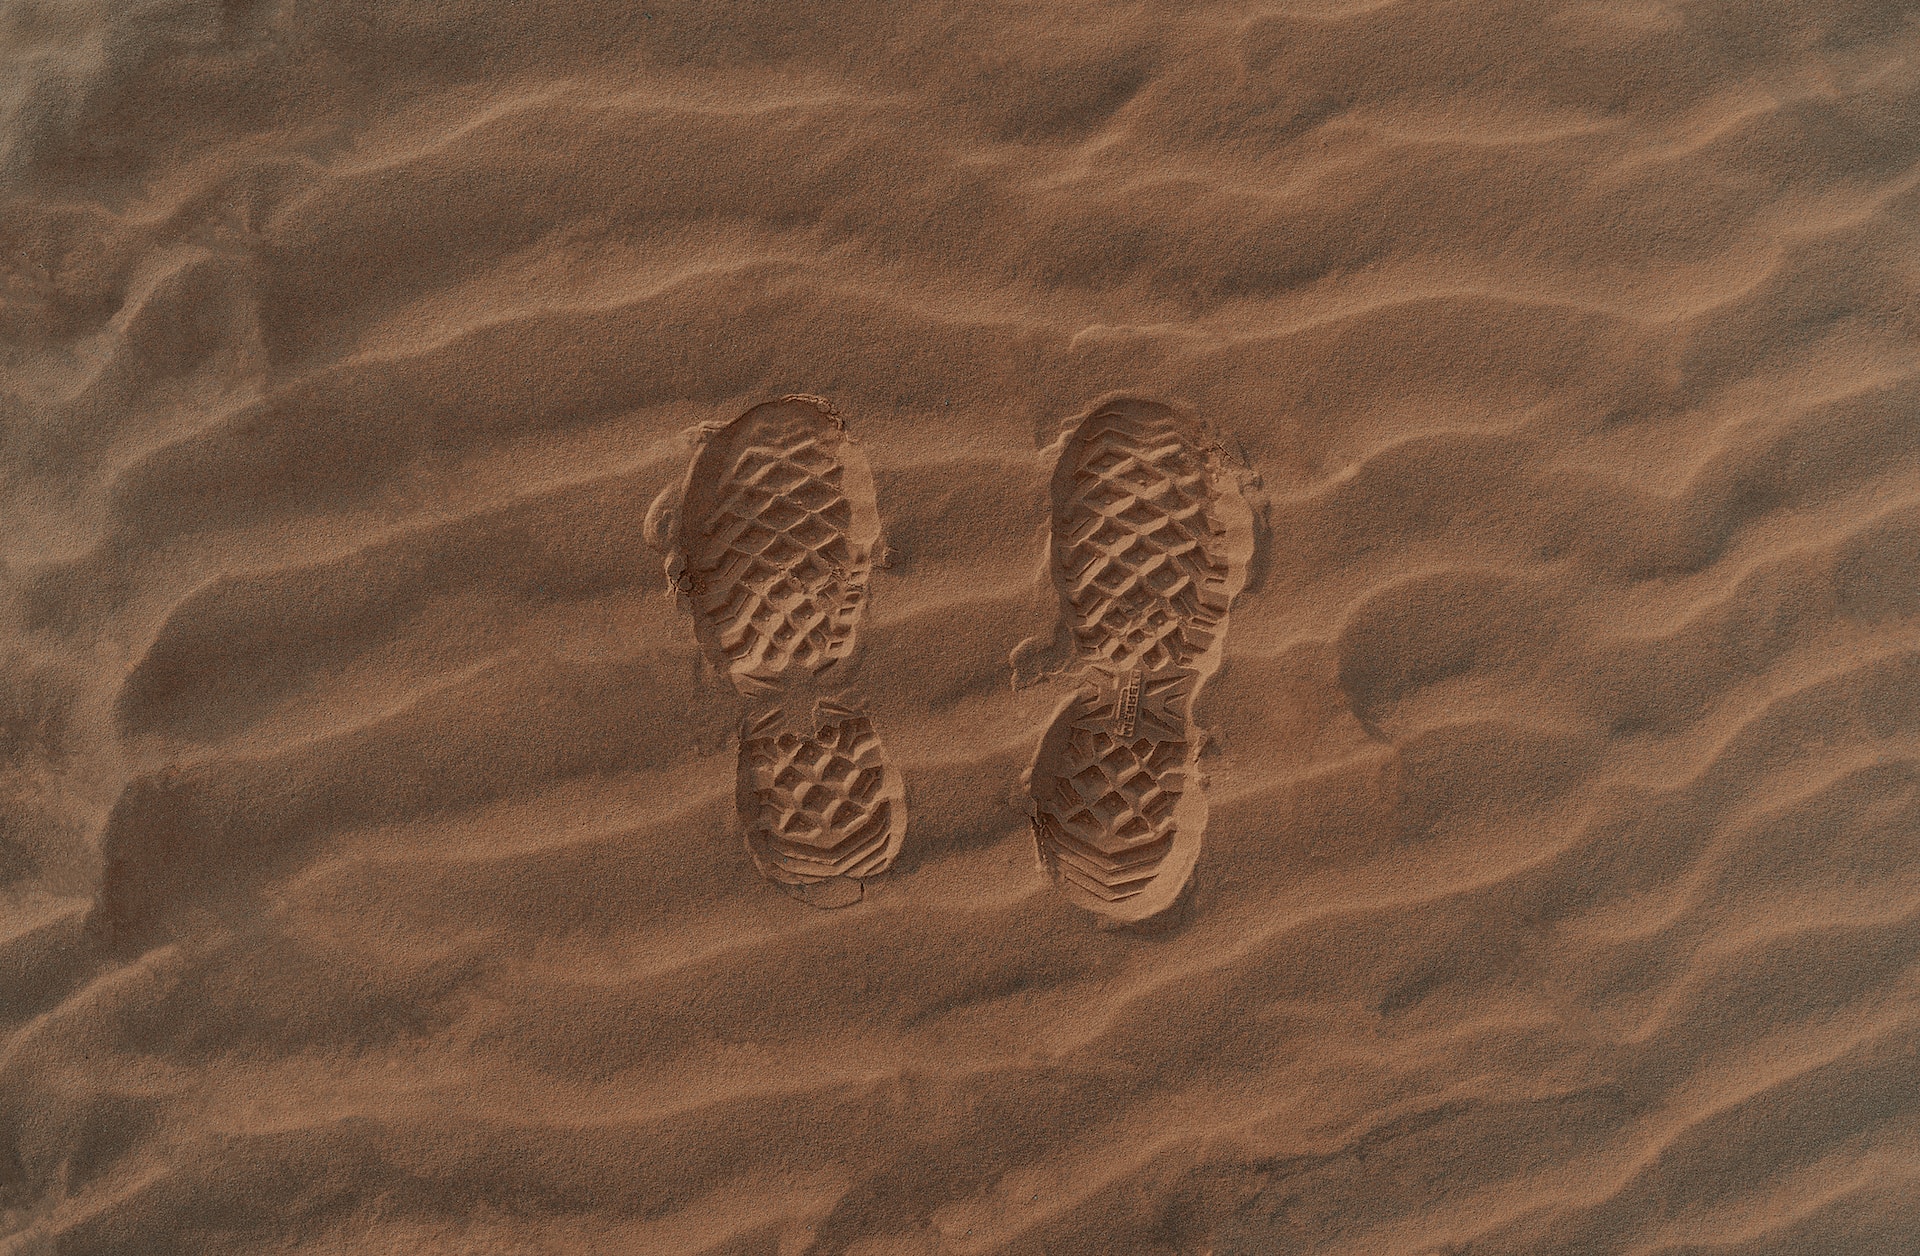 footprints in the sand -types of evidence